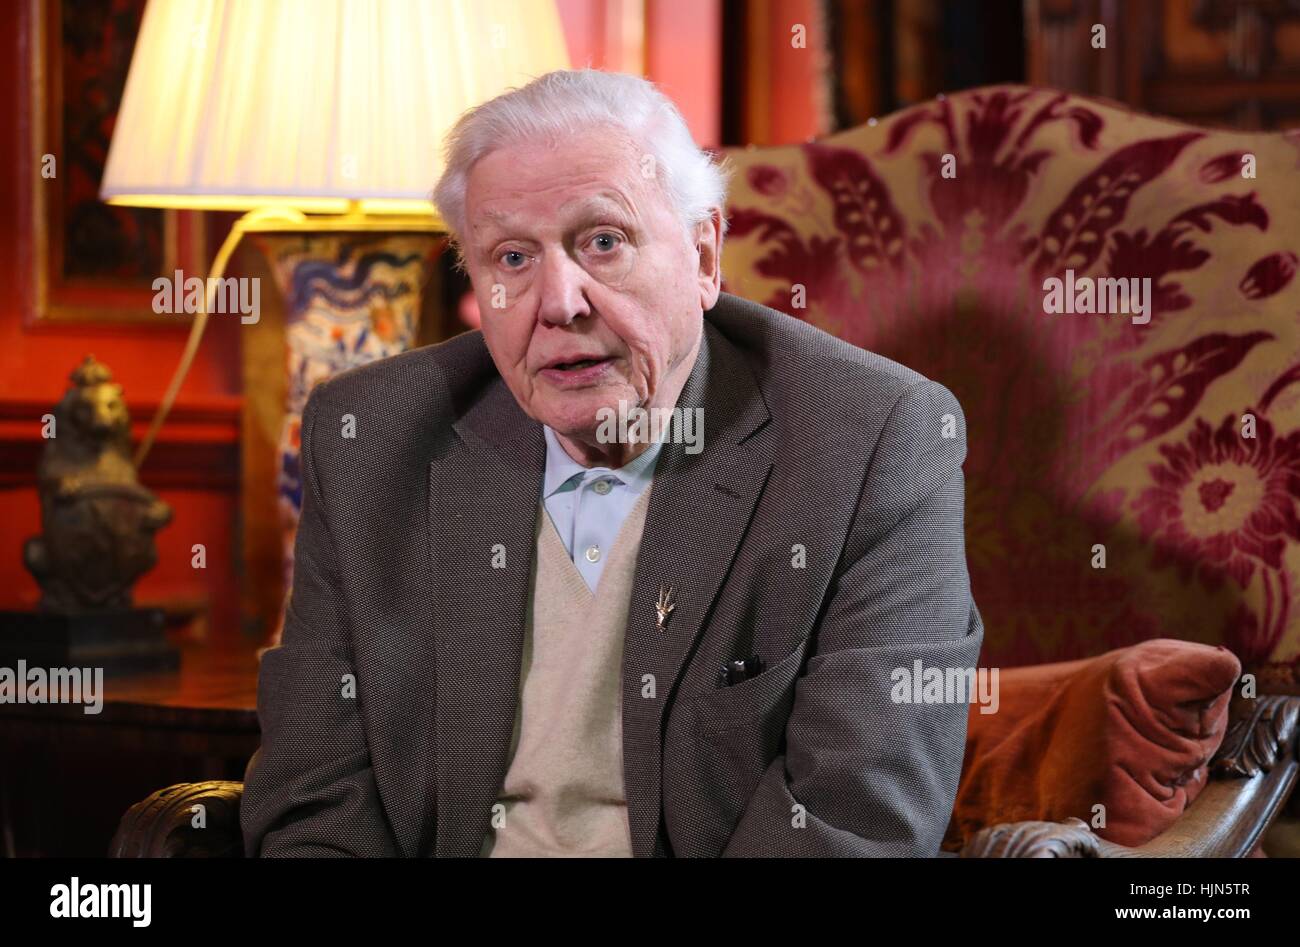 Sir David Attenborough speaks to the media at Prestonfield House, Edinburgh, before receiveing a &Acirc;£250,000 cheque from the People's Postcode Lottery for the charity Fauna & Flora International of which he is Vice-President. Stock Photo